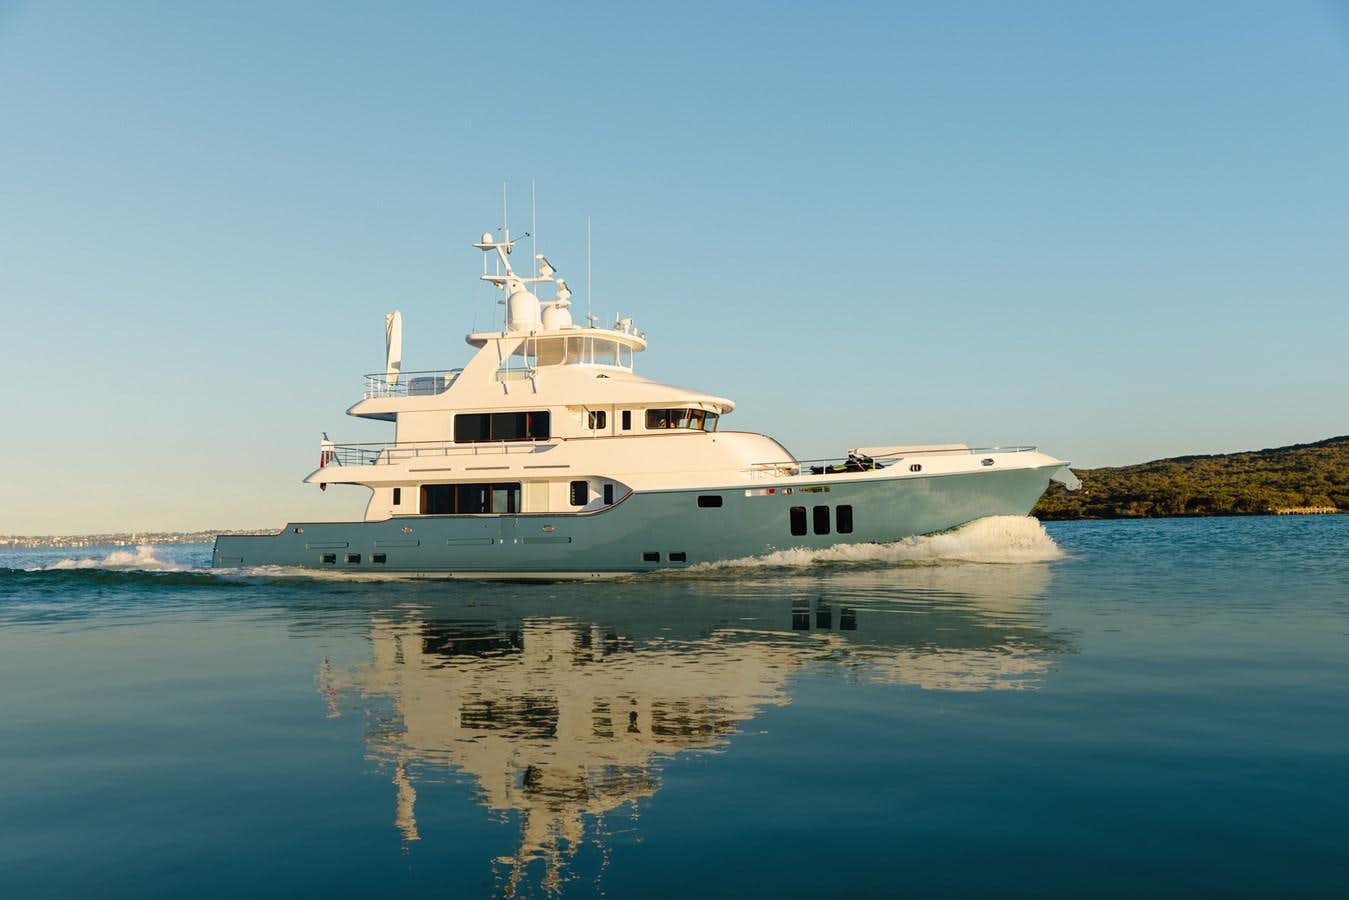 Serenity
Yacht for Sale